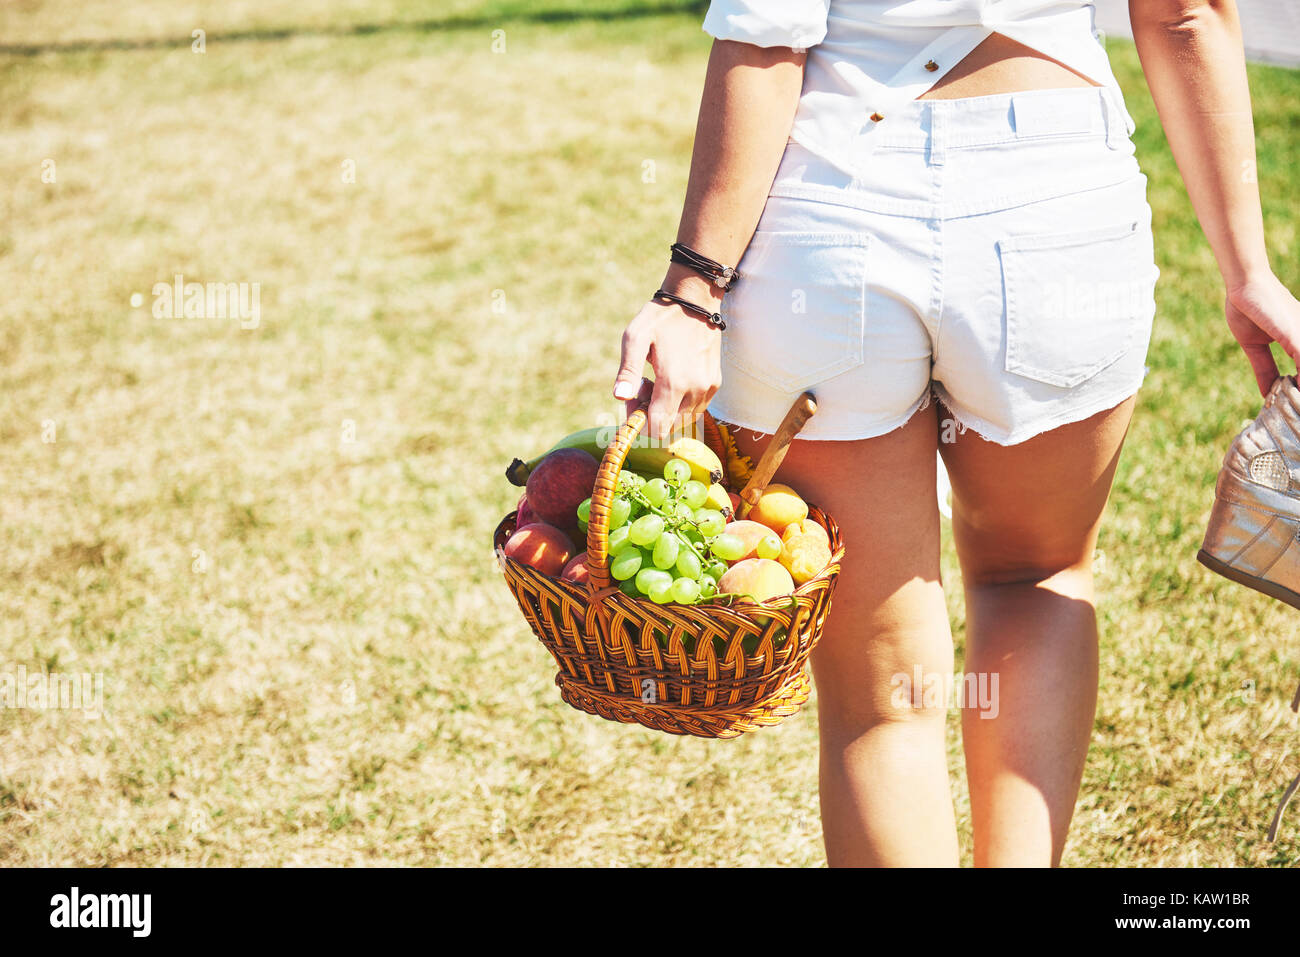 Young girl with basket going to have a picnic Stock Photo